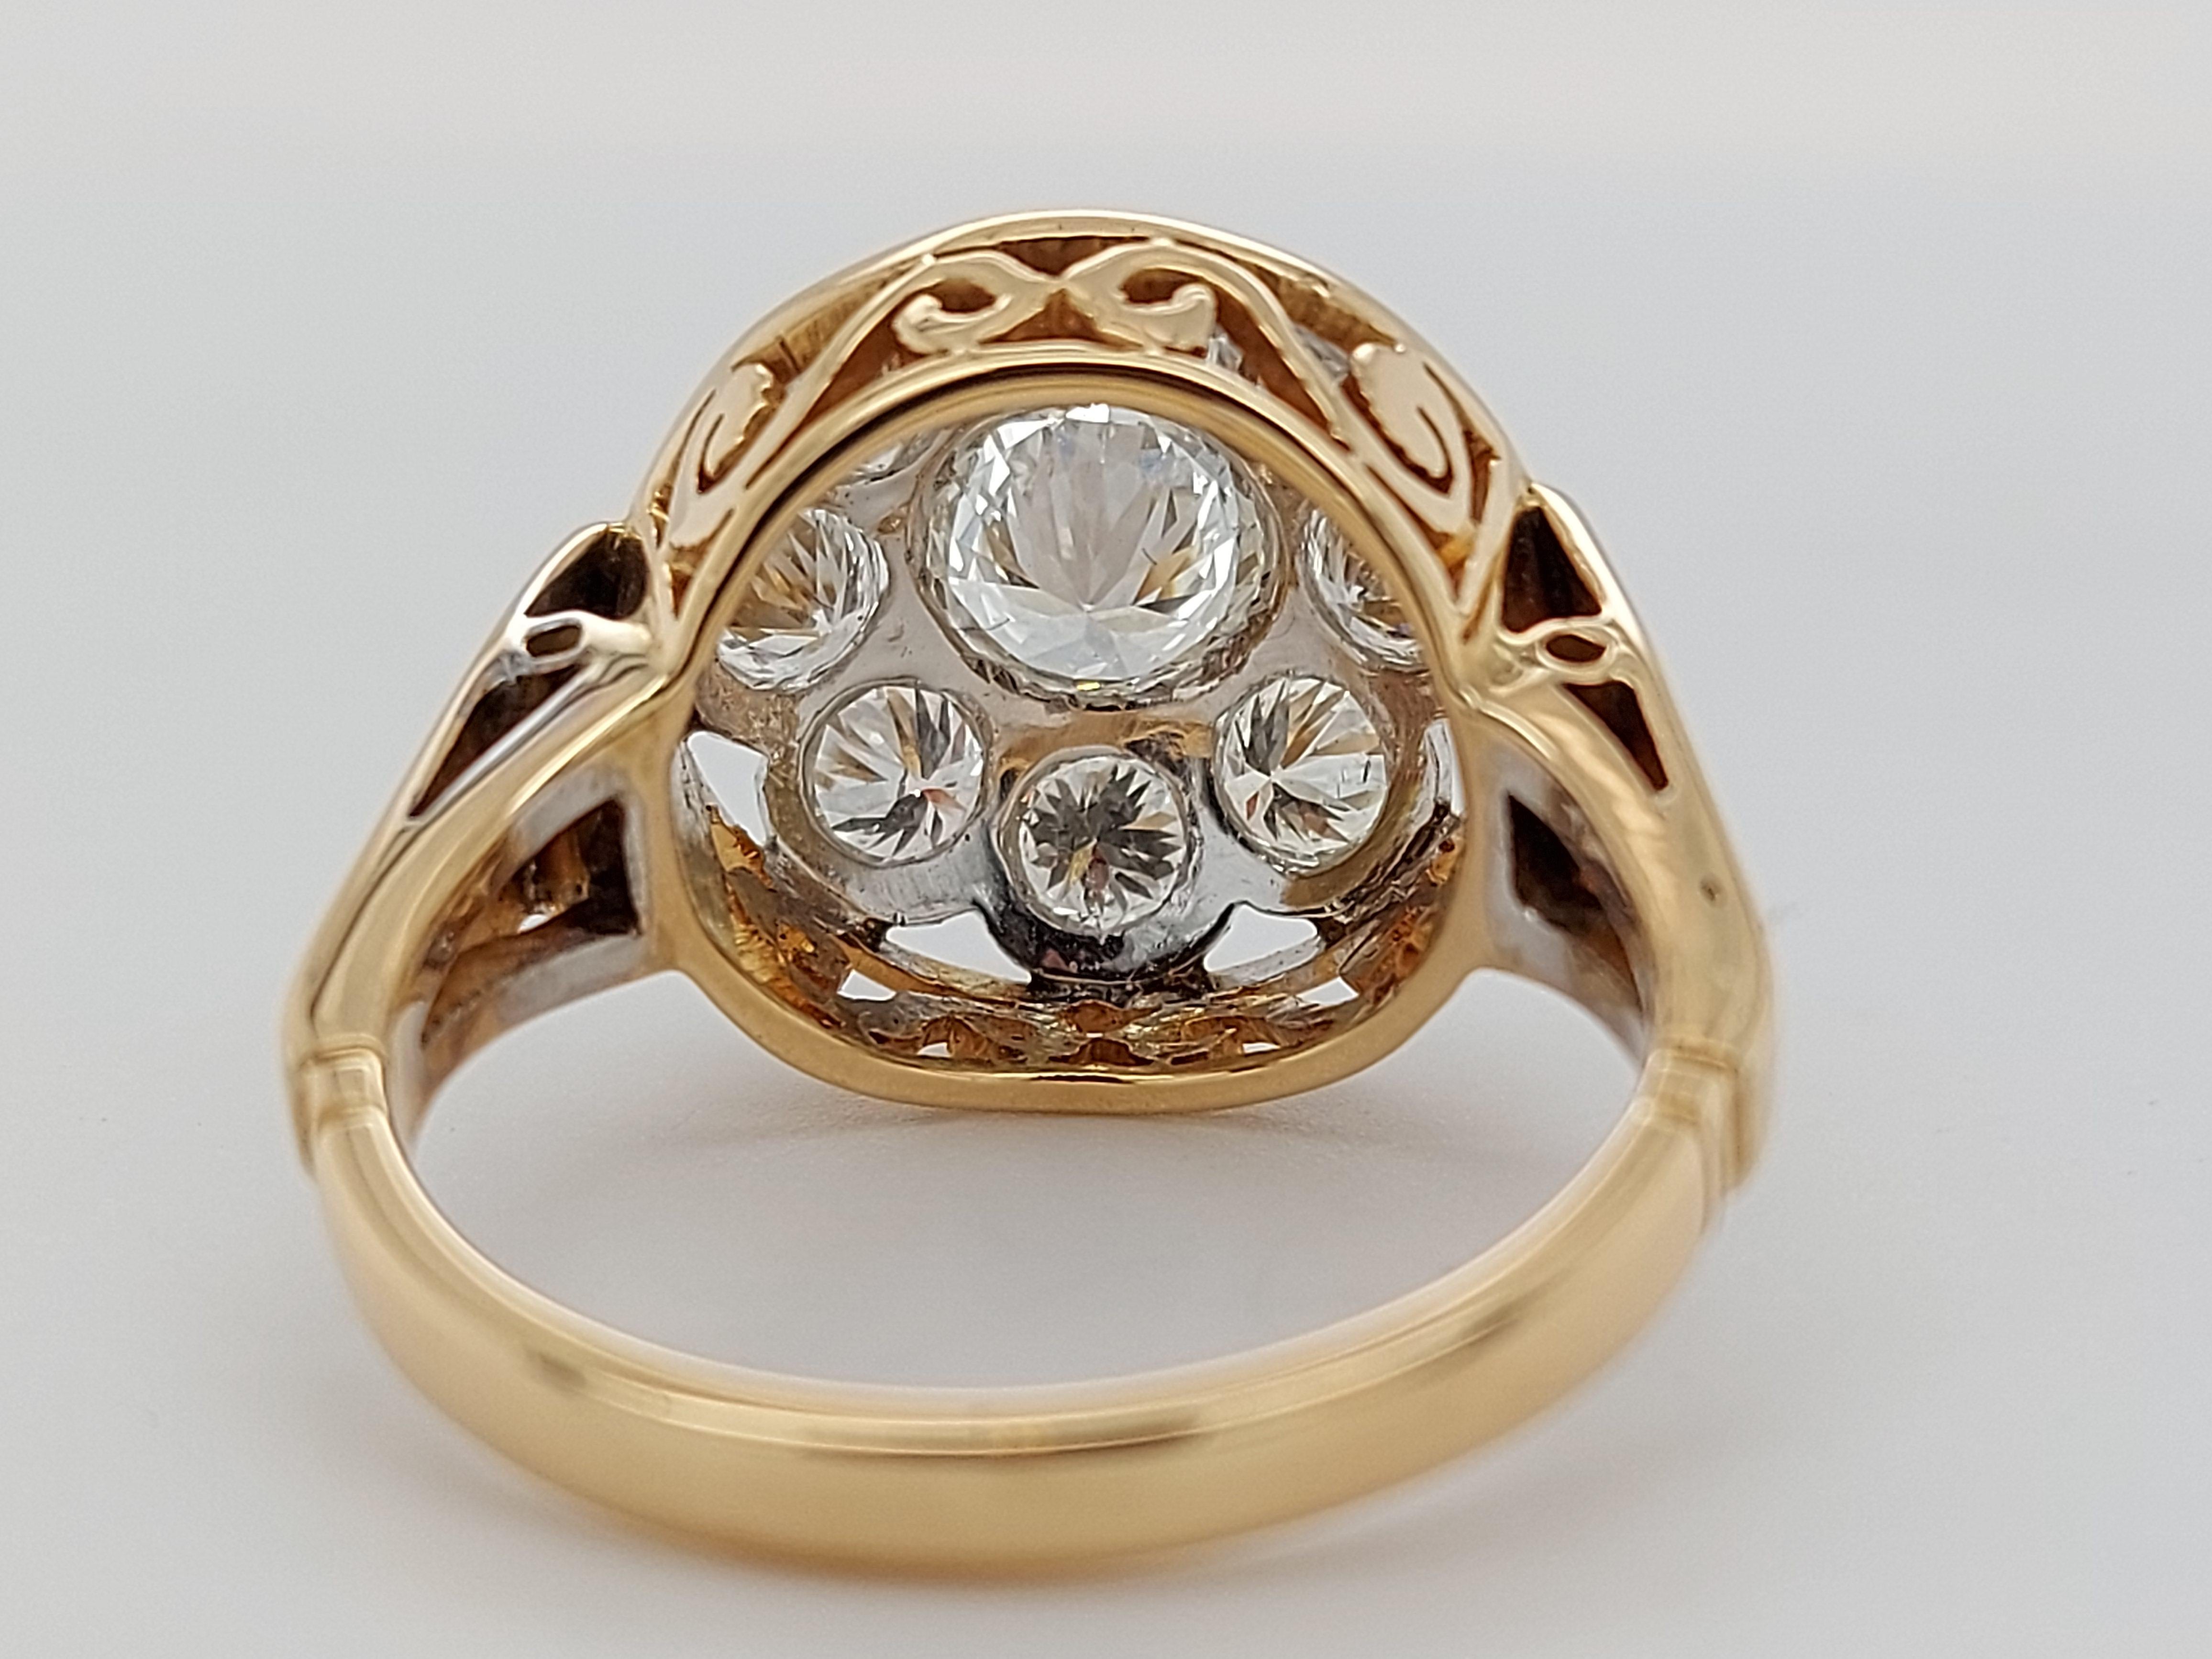 18 Karat Yellow / White Gold Vintage Ring with 2.35 Carat Brilliant Cut Diamonds For Sale 8